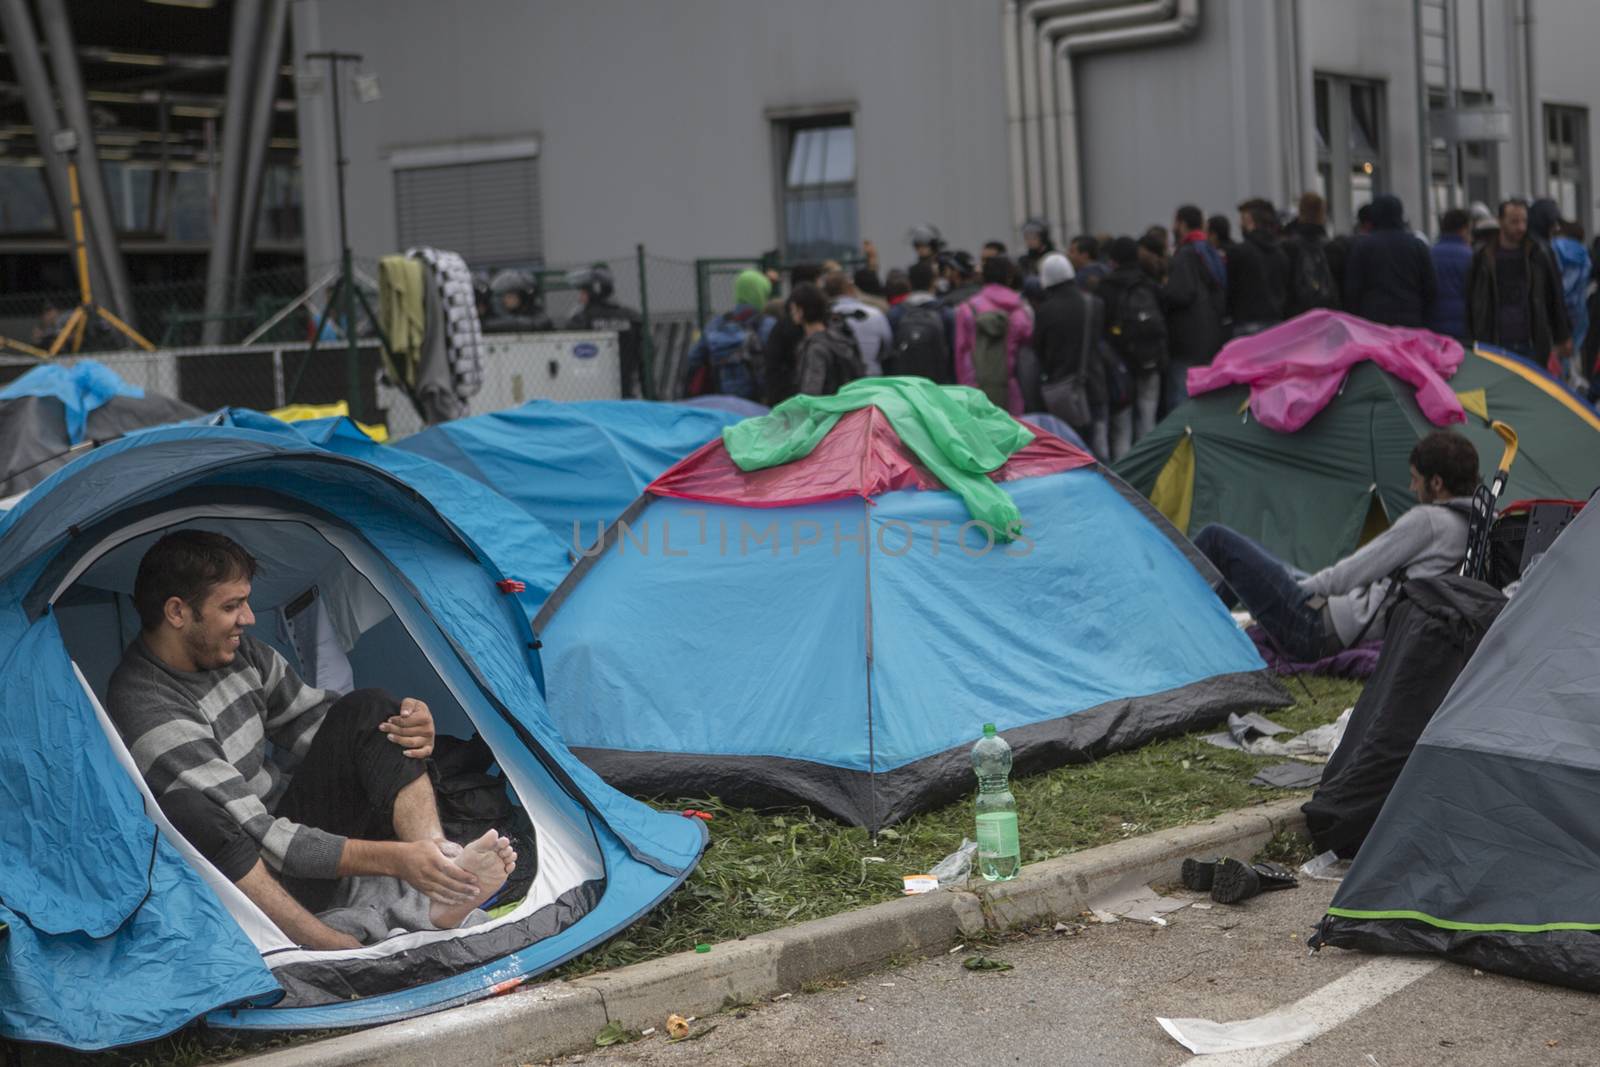 CROATIA, Harmica: Refugees on the border between Croatia and Slovenia find ways to pass the time on September 20, 2015.  Refugees are at the mercy of European authorities as they attempt to escape their war-ravaged countries.